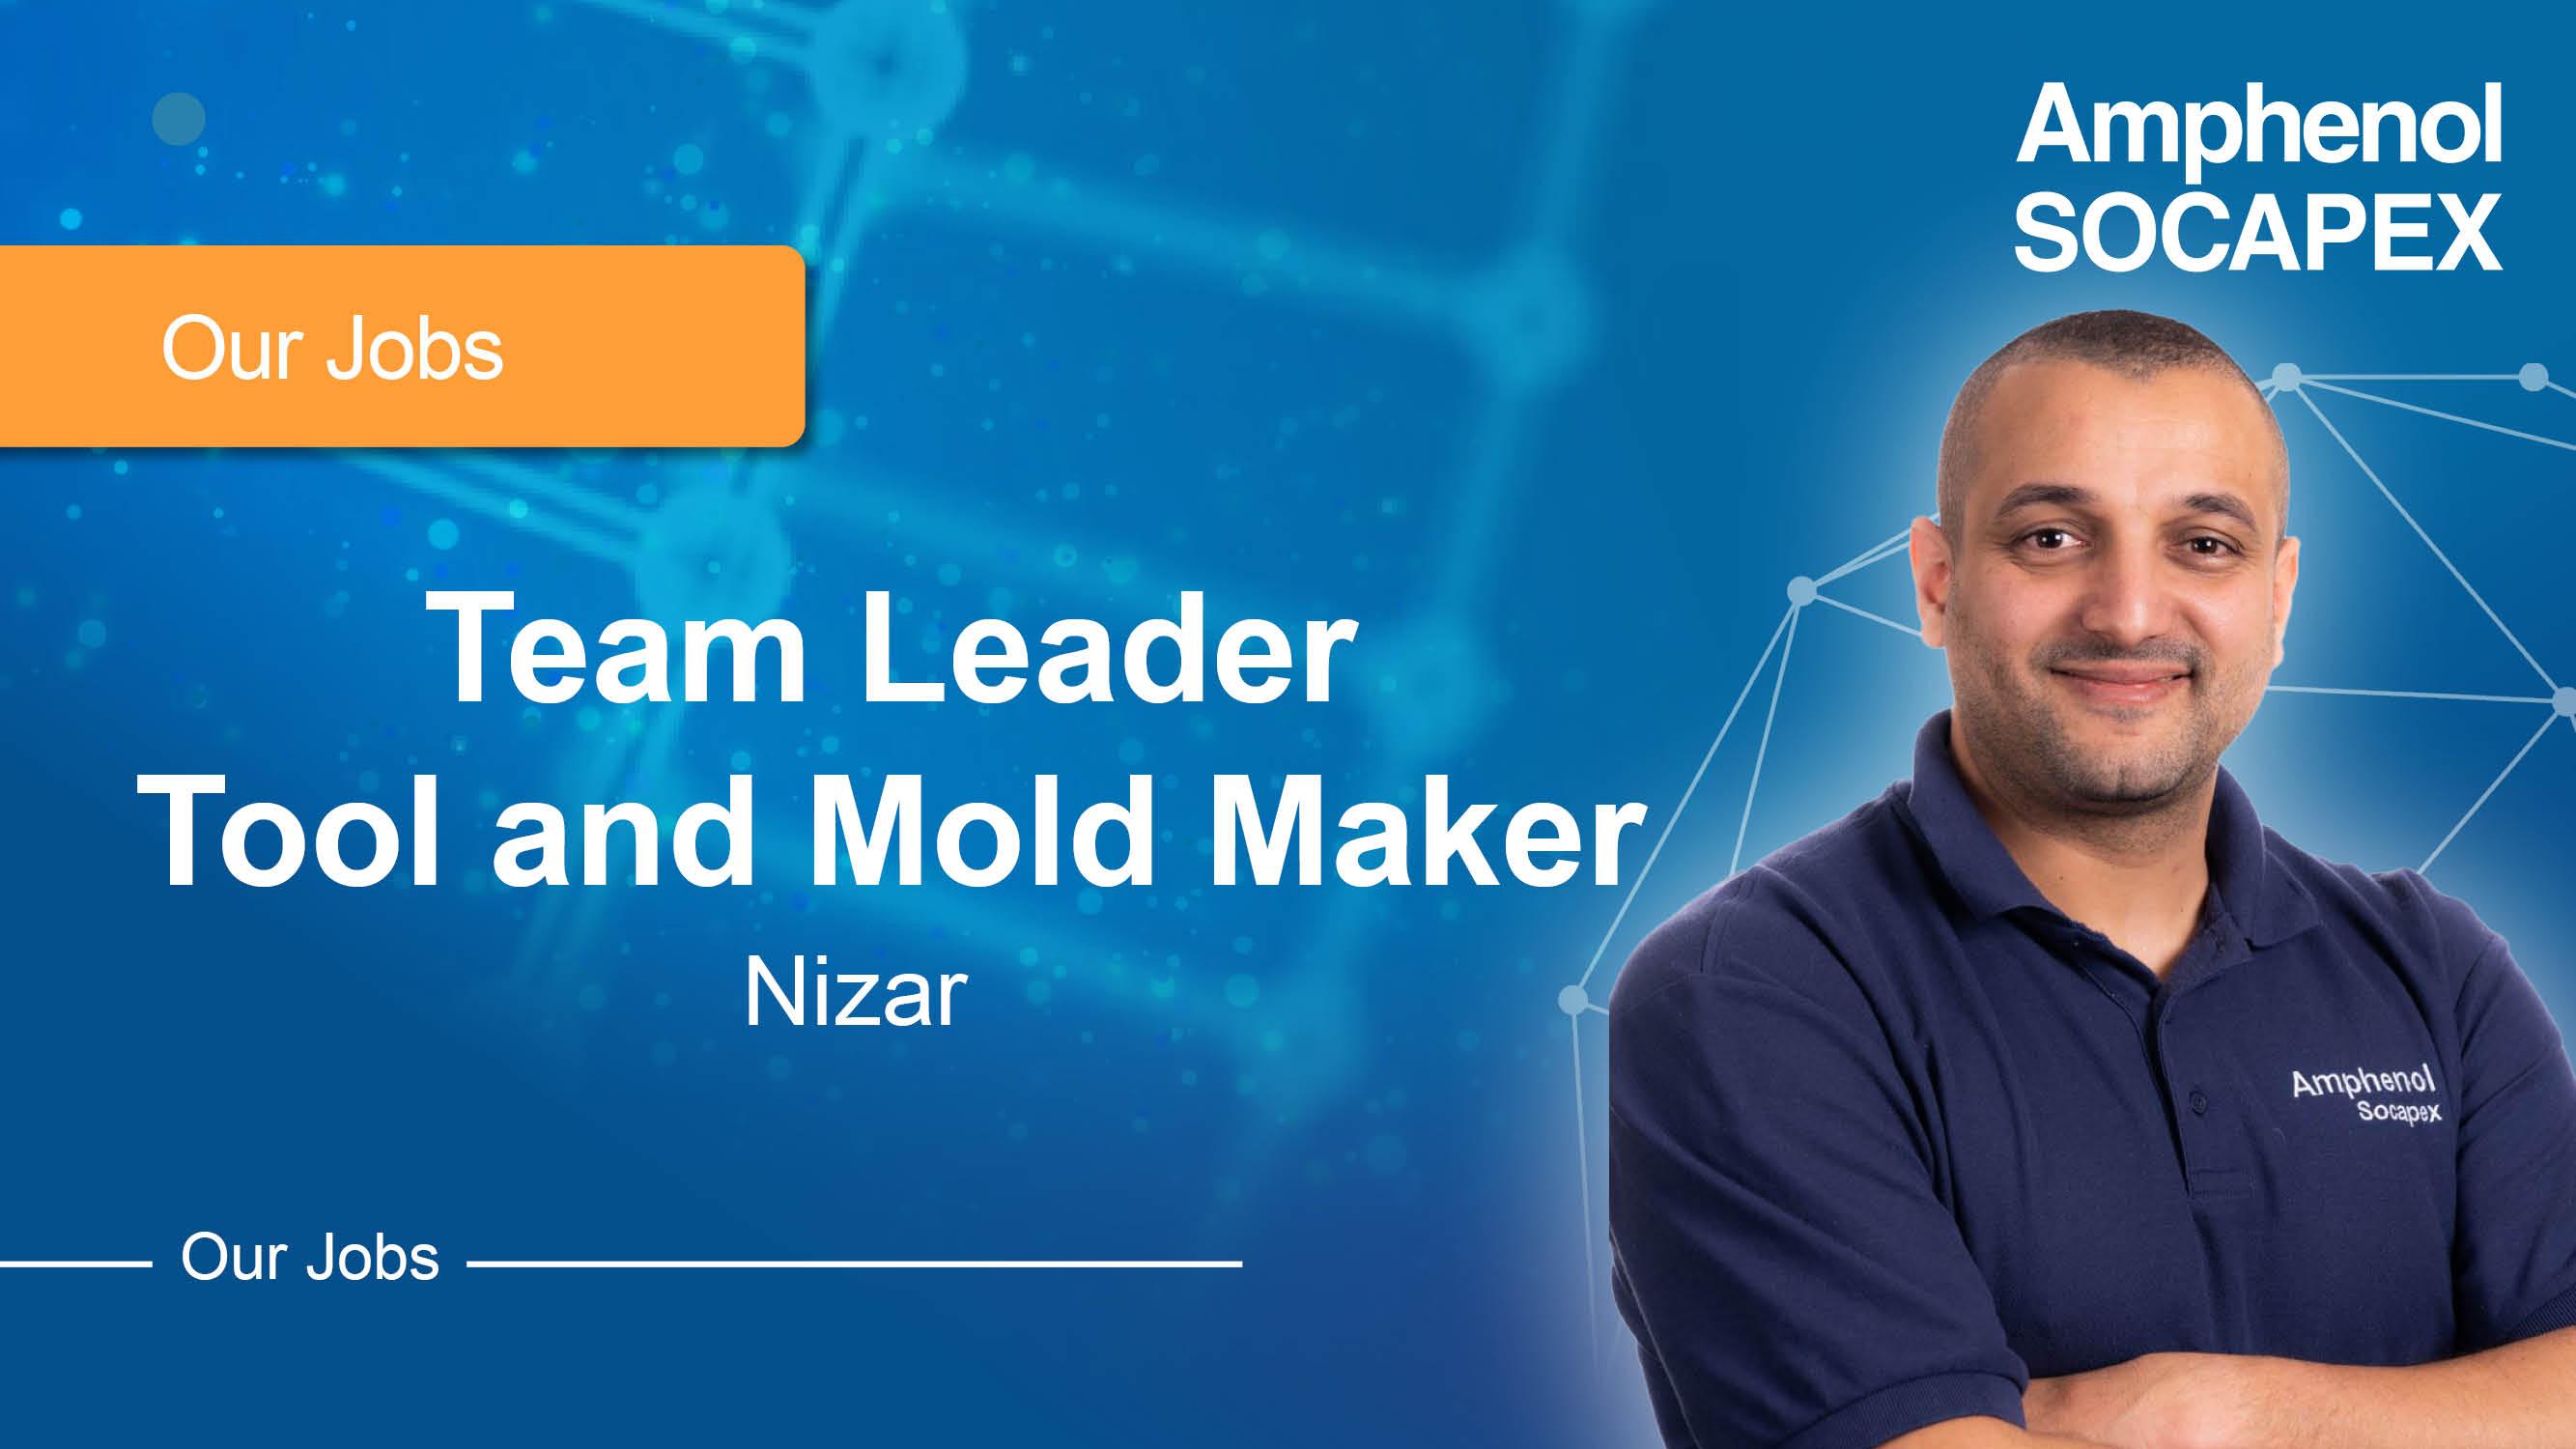 Team leader tool and molding maker